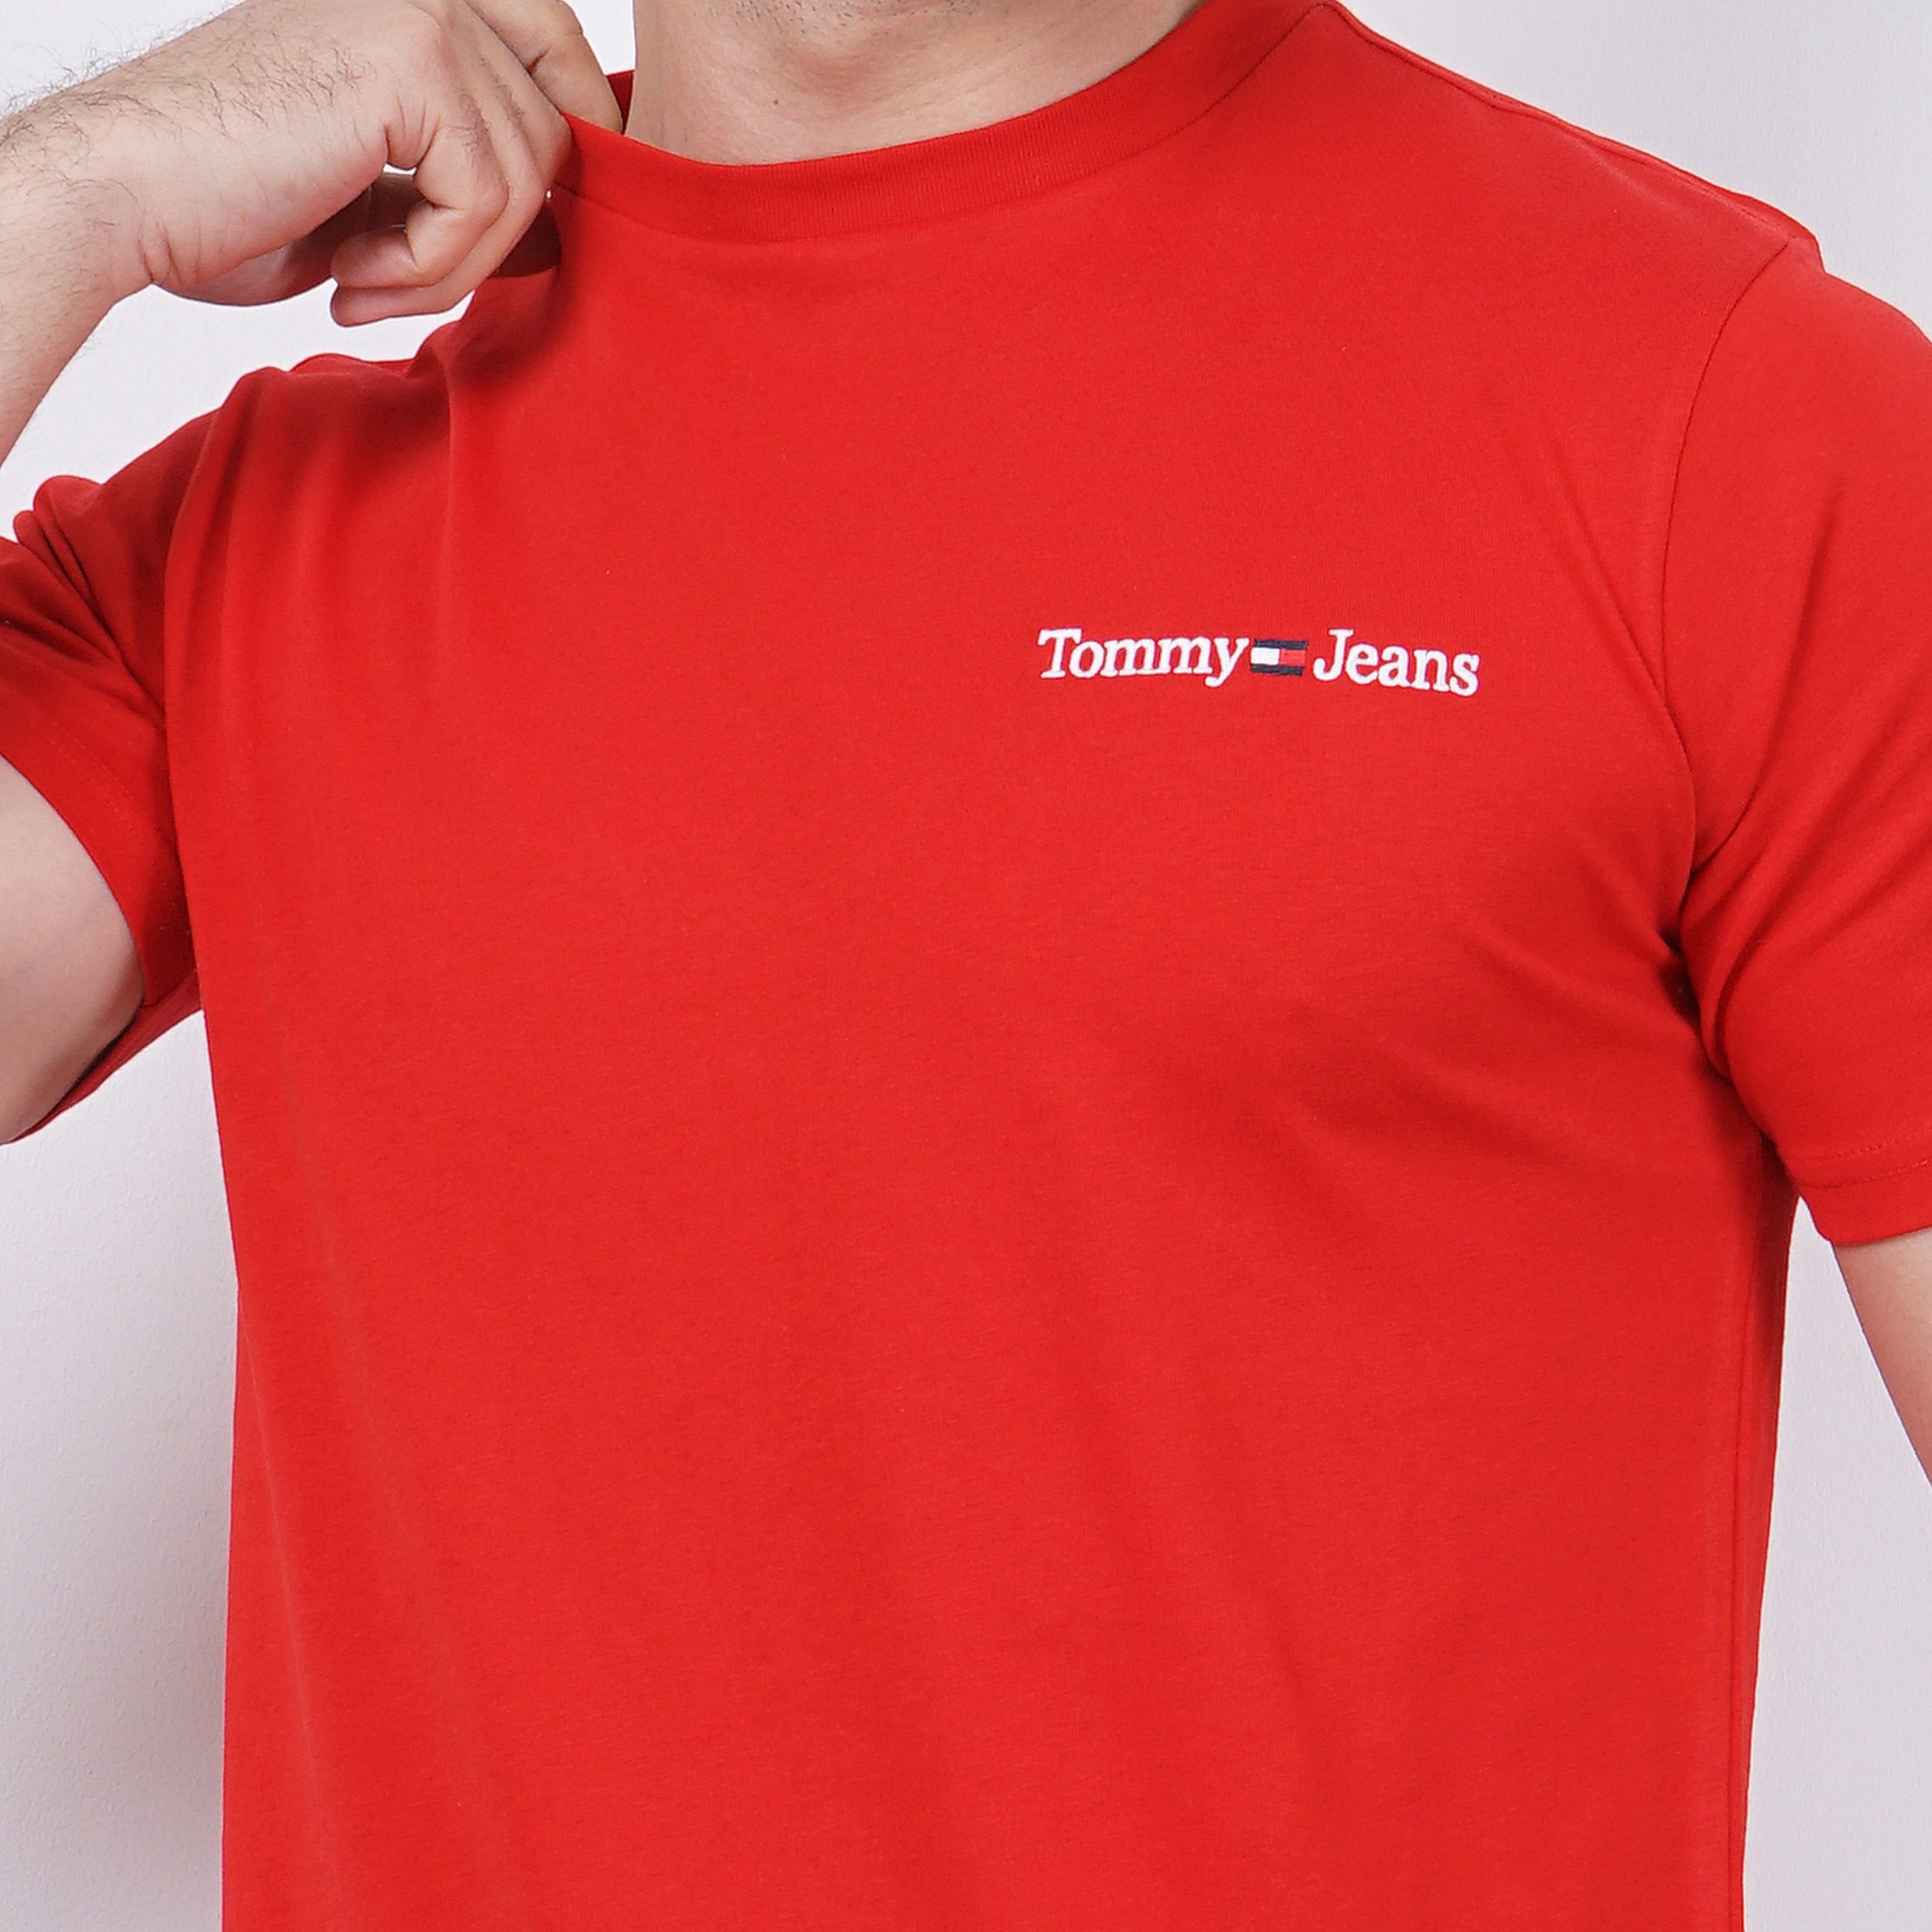 Tommy Jeans Tee - Marca Deals - Tommy Hilfiger